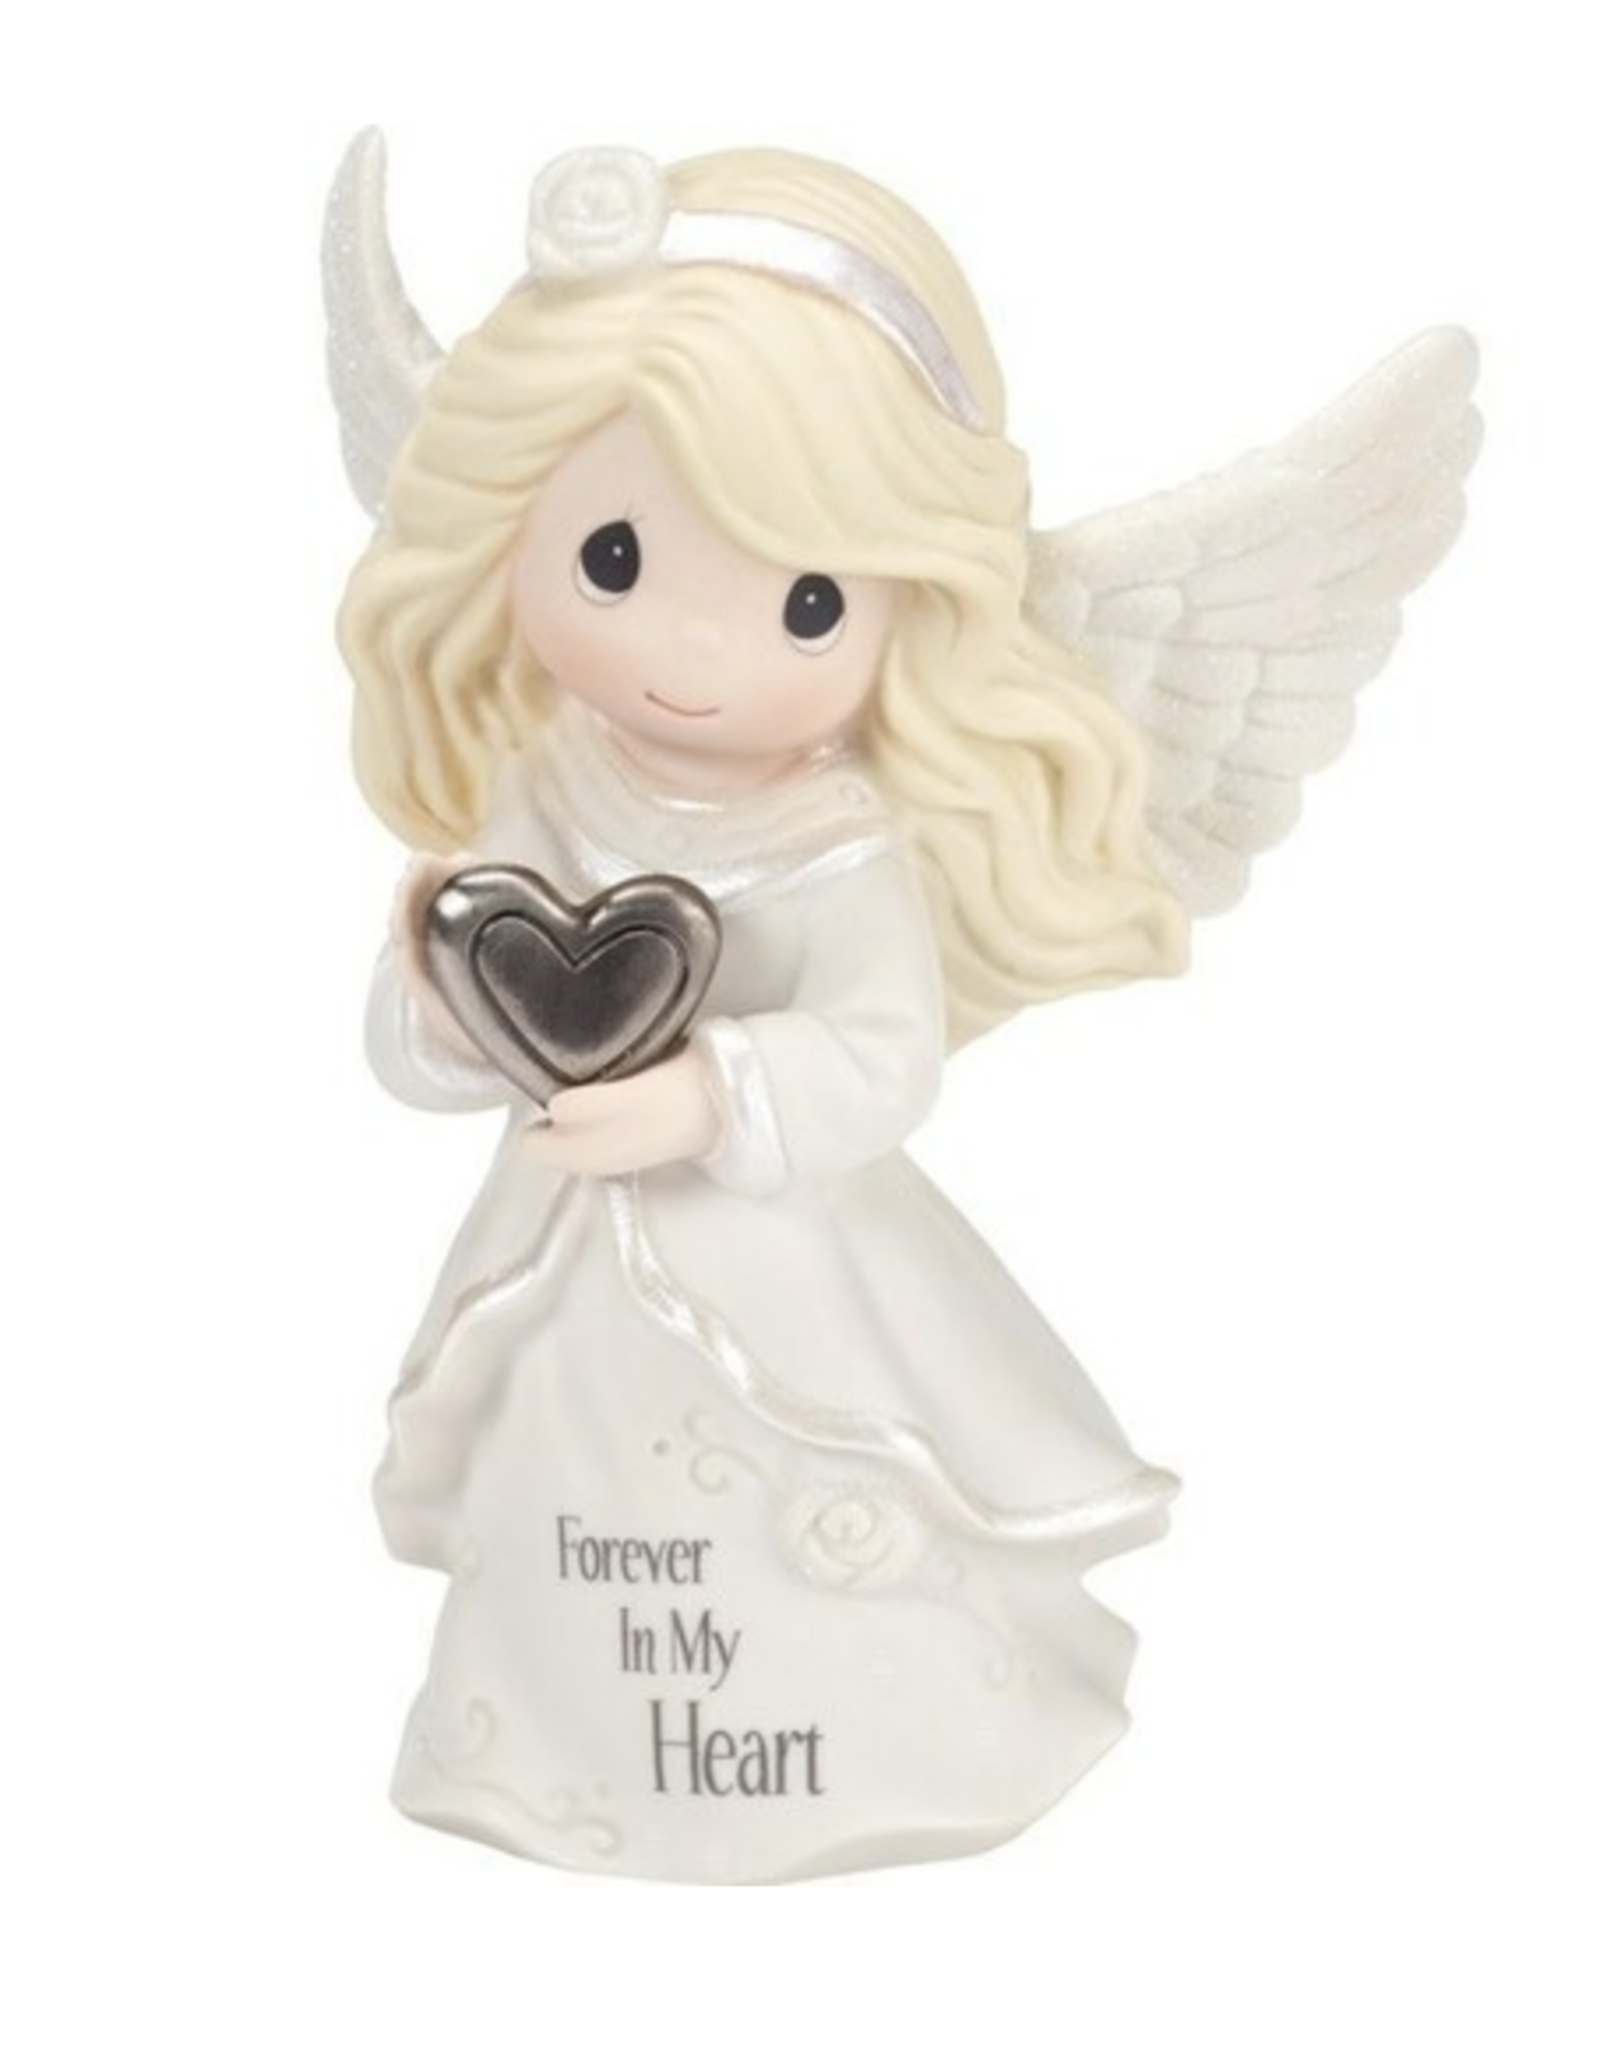 Precious Moments Precious Moments - Forever in My Heart, Bisque Porcelain/Metal Figurine